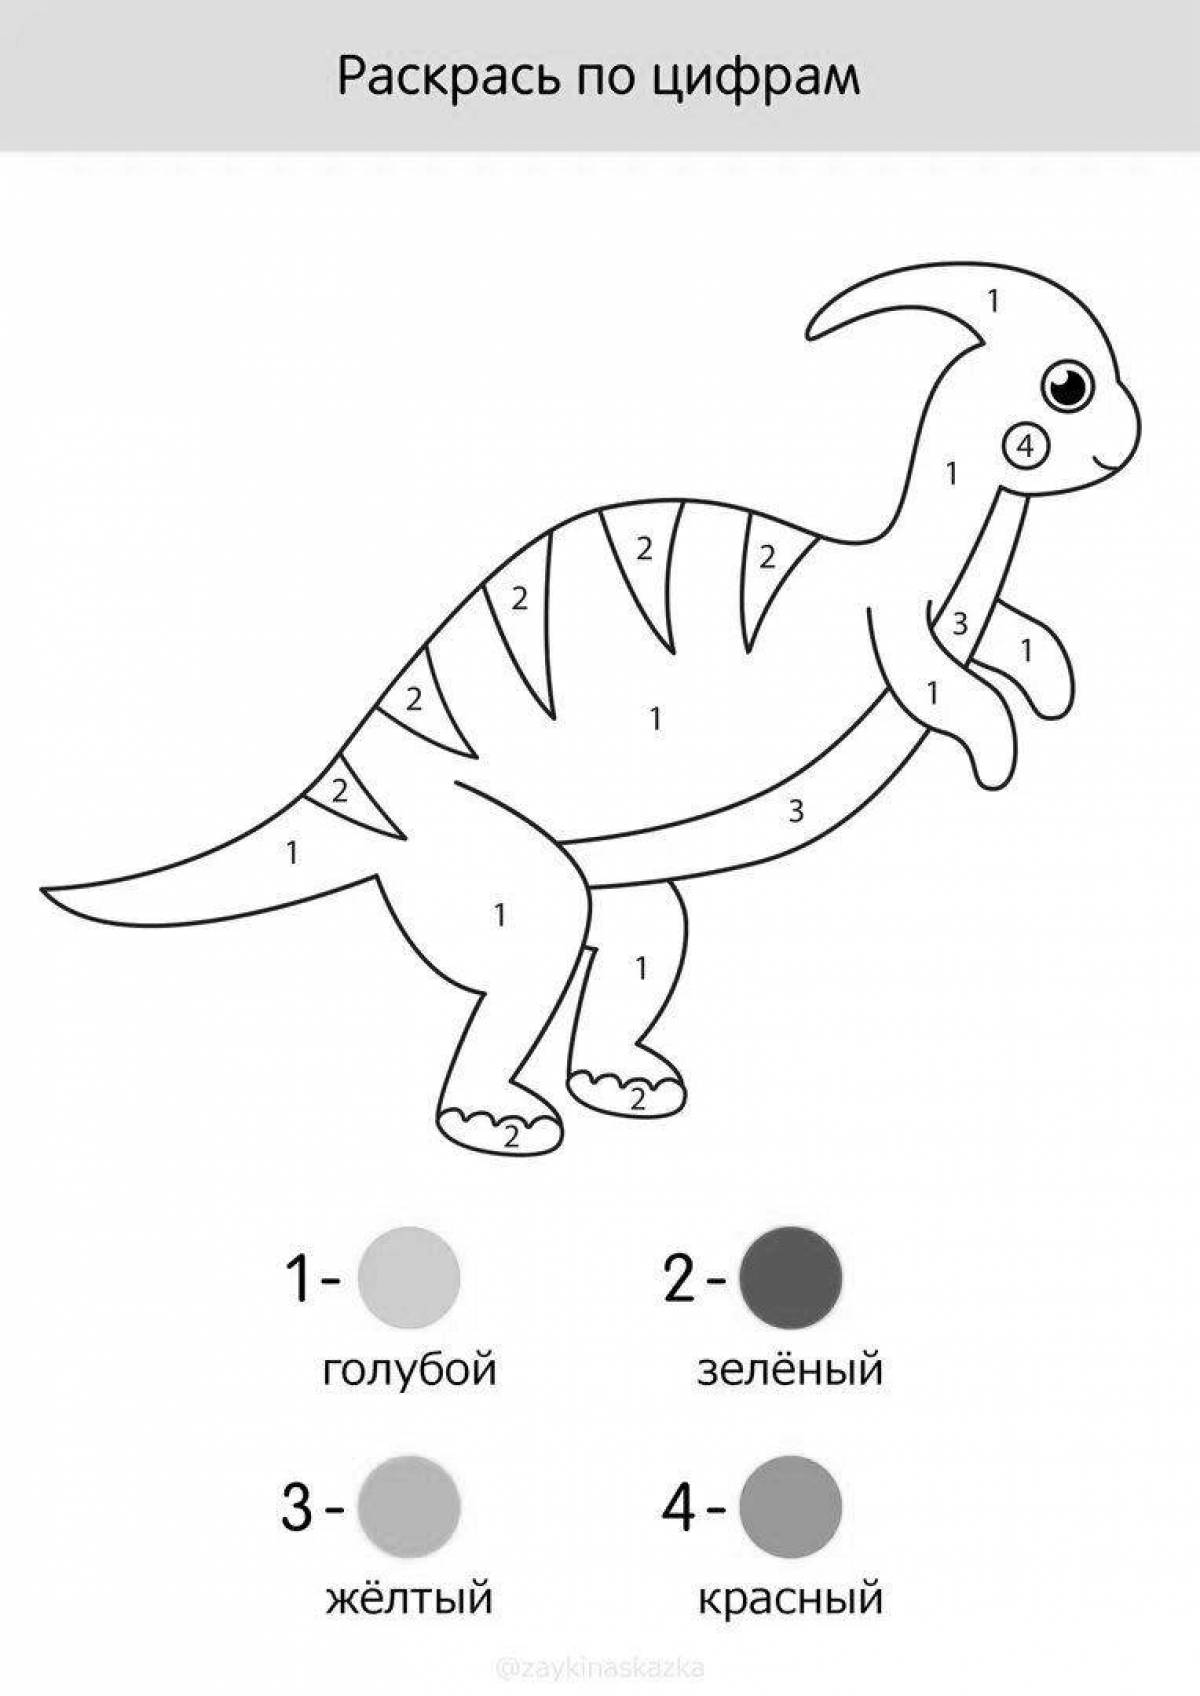 Majestic coloring dinosaurs by numbers